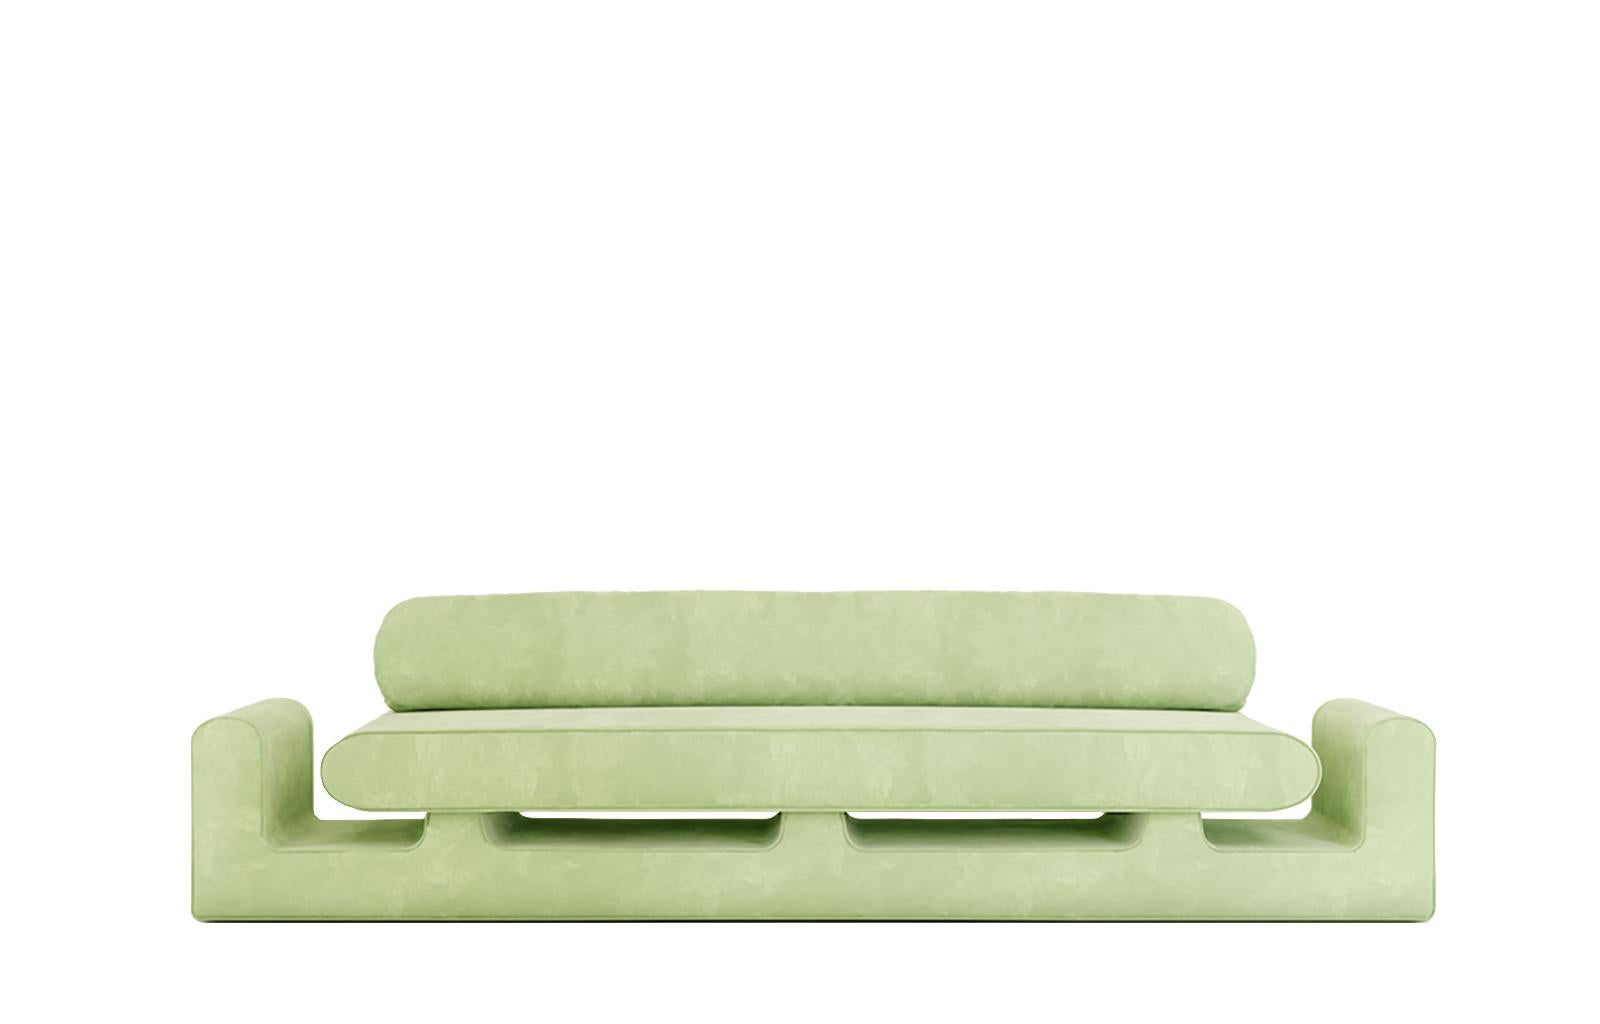 Hug green sofa by Rejo Studio.
Dimensions: D 315 x W 95 x H 76 cm.
Materials: wooden structure, with velvet.
Also available in different colours. 

Long comfortable hug. The hug sofa features two welcoming chubby arms and a magical handy space for